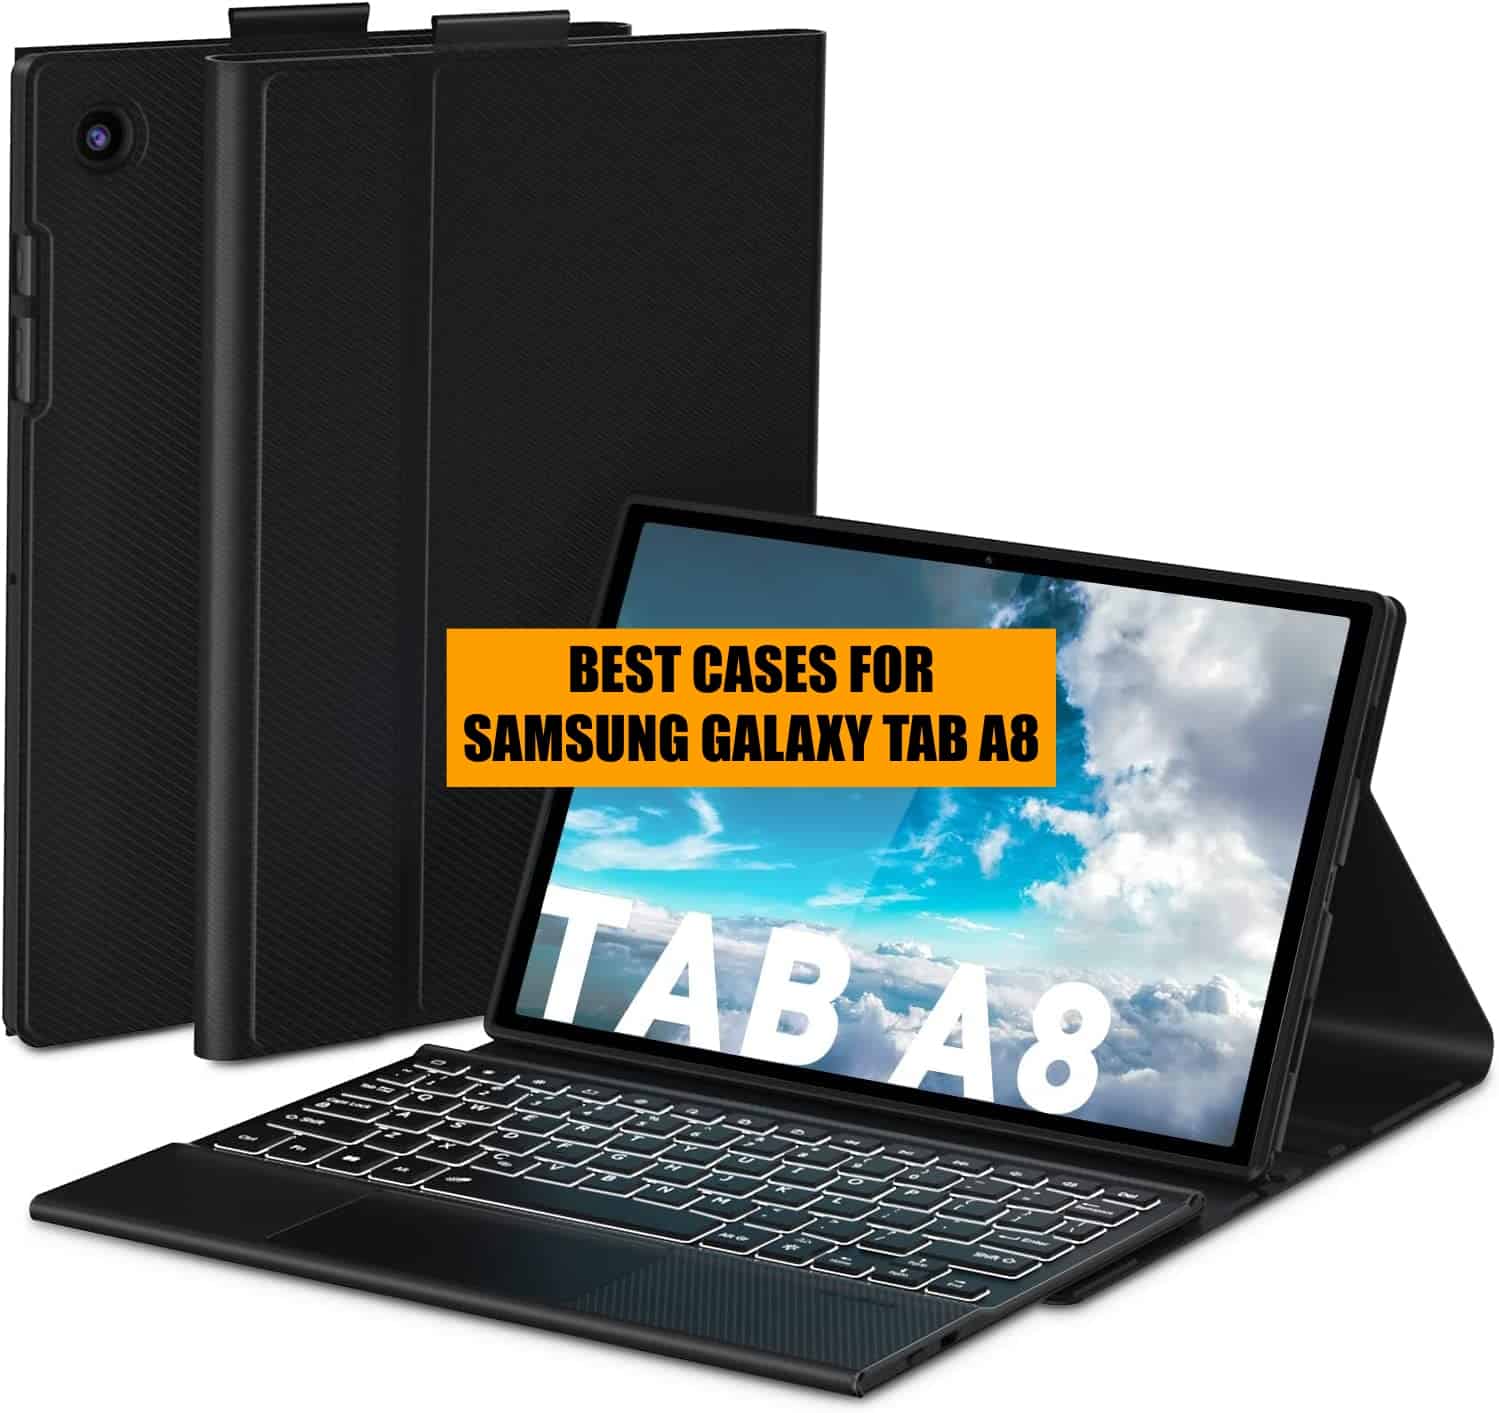 8 Best Cases For Samsung Galaxy Tab A8 - (Ultimate List)